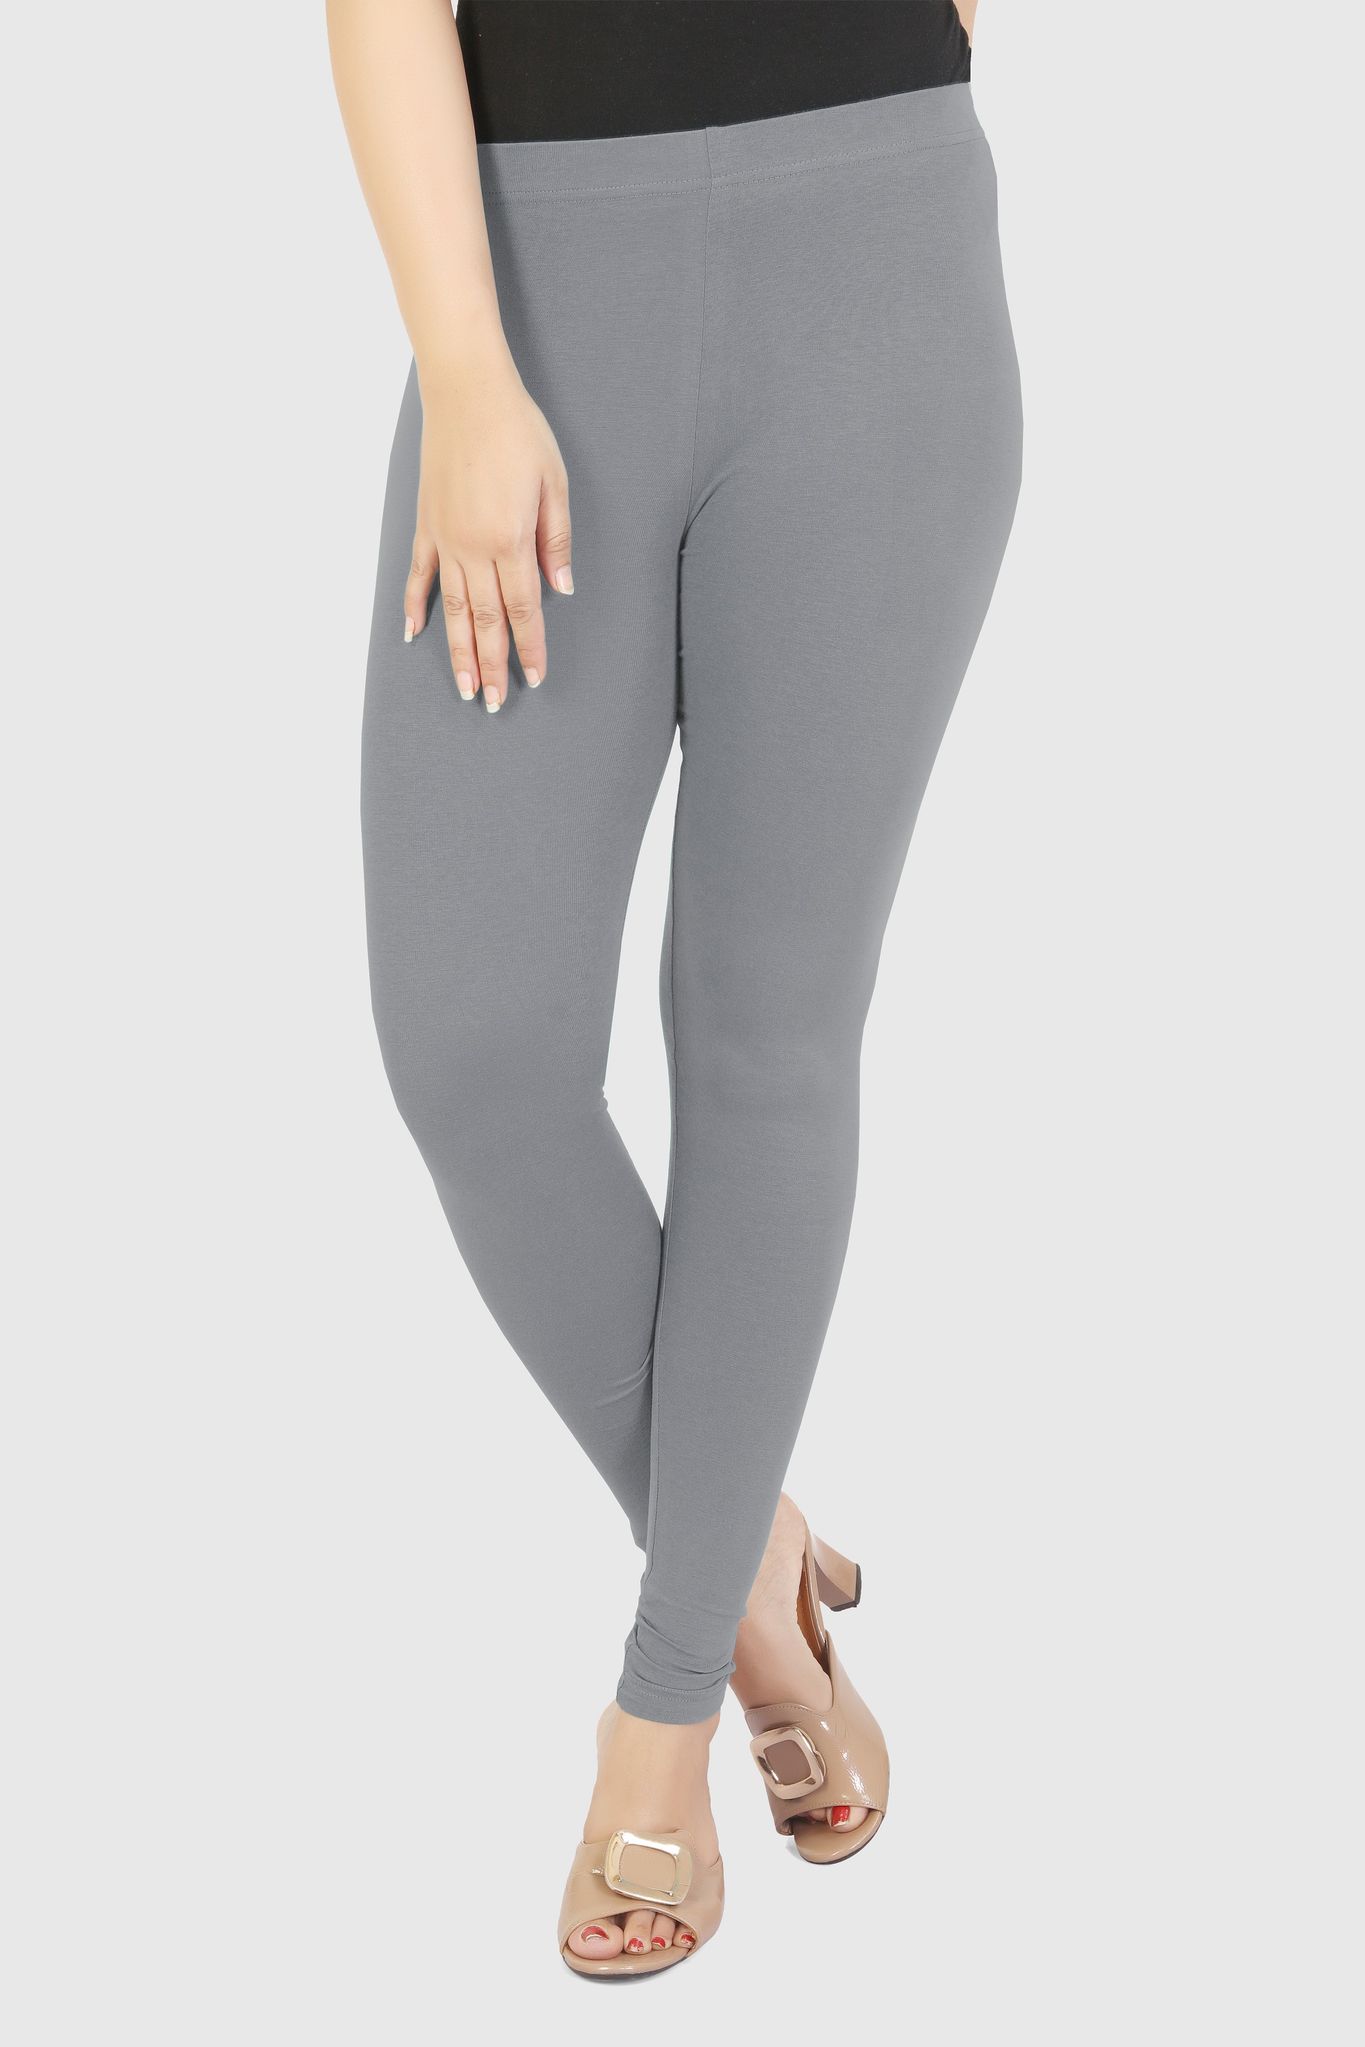 Cotton Lycra Ladies Ankle Length Leggings, Size : Free Size, Length : 34  Inches at Rs 205 / piece in Surat